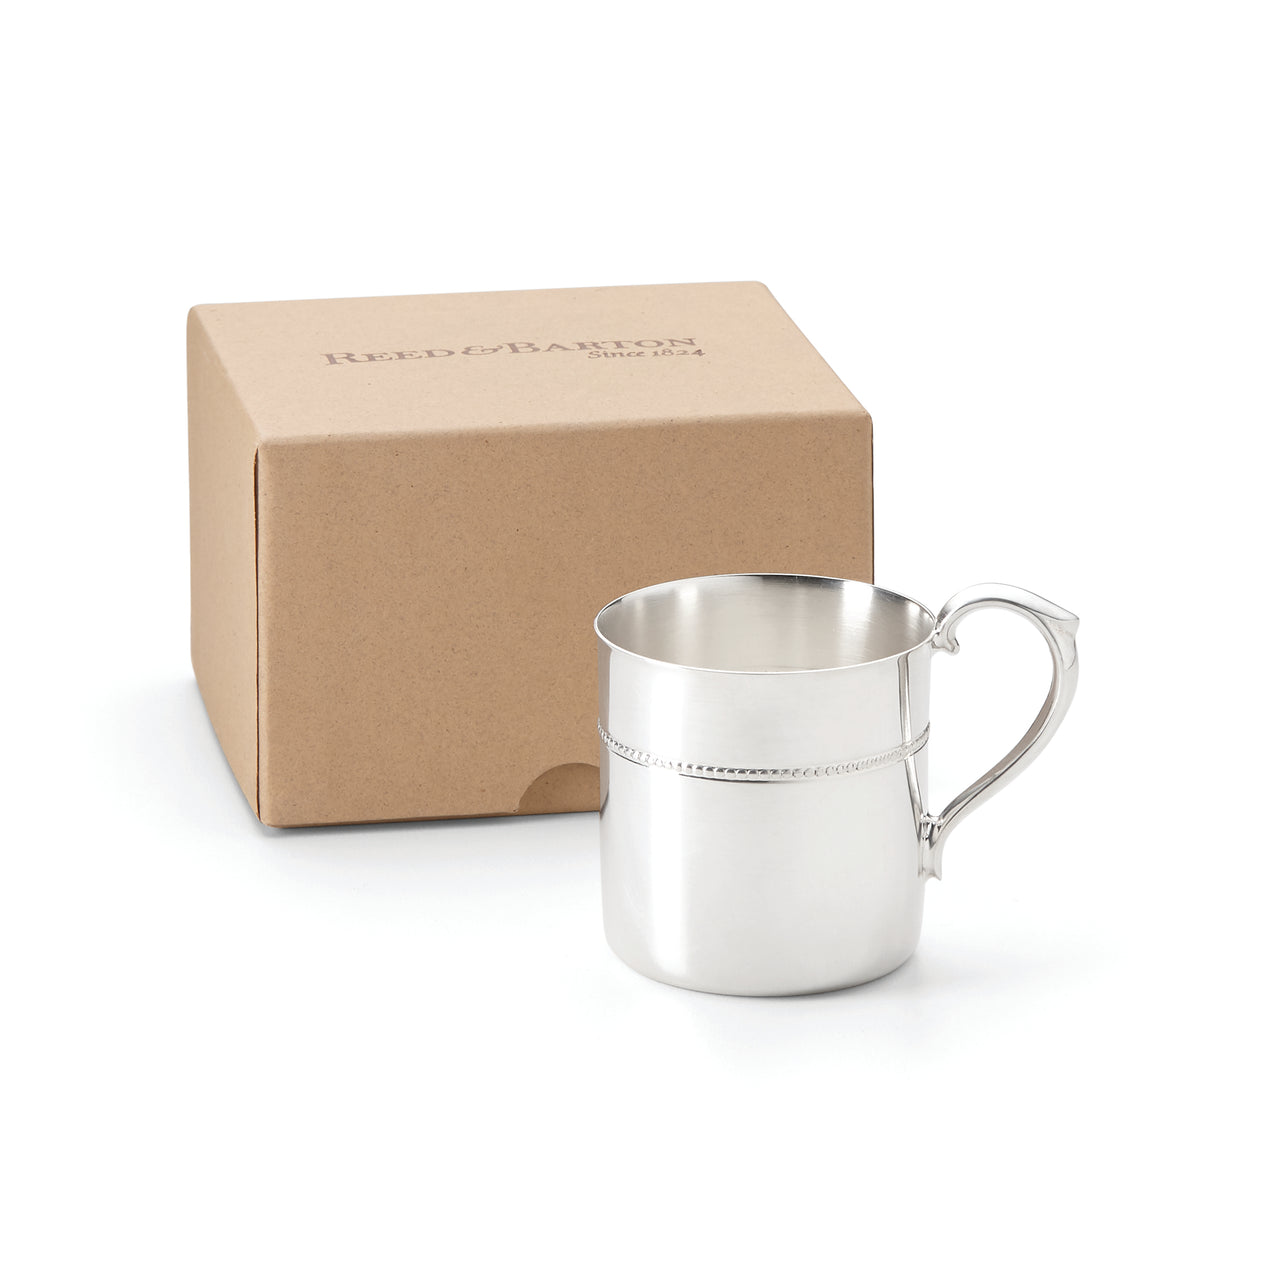 Cambridge Sterling Silver Baby Cup with Bead